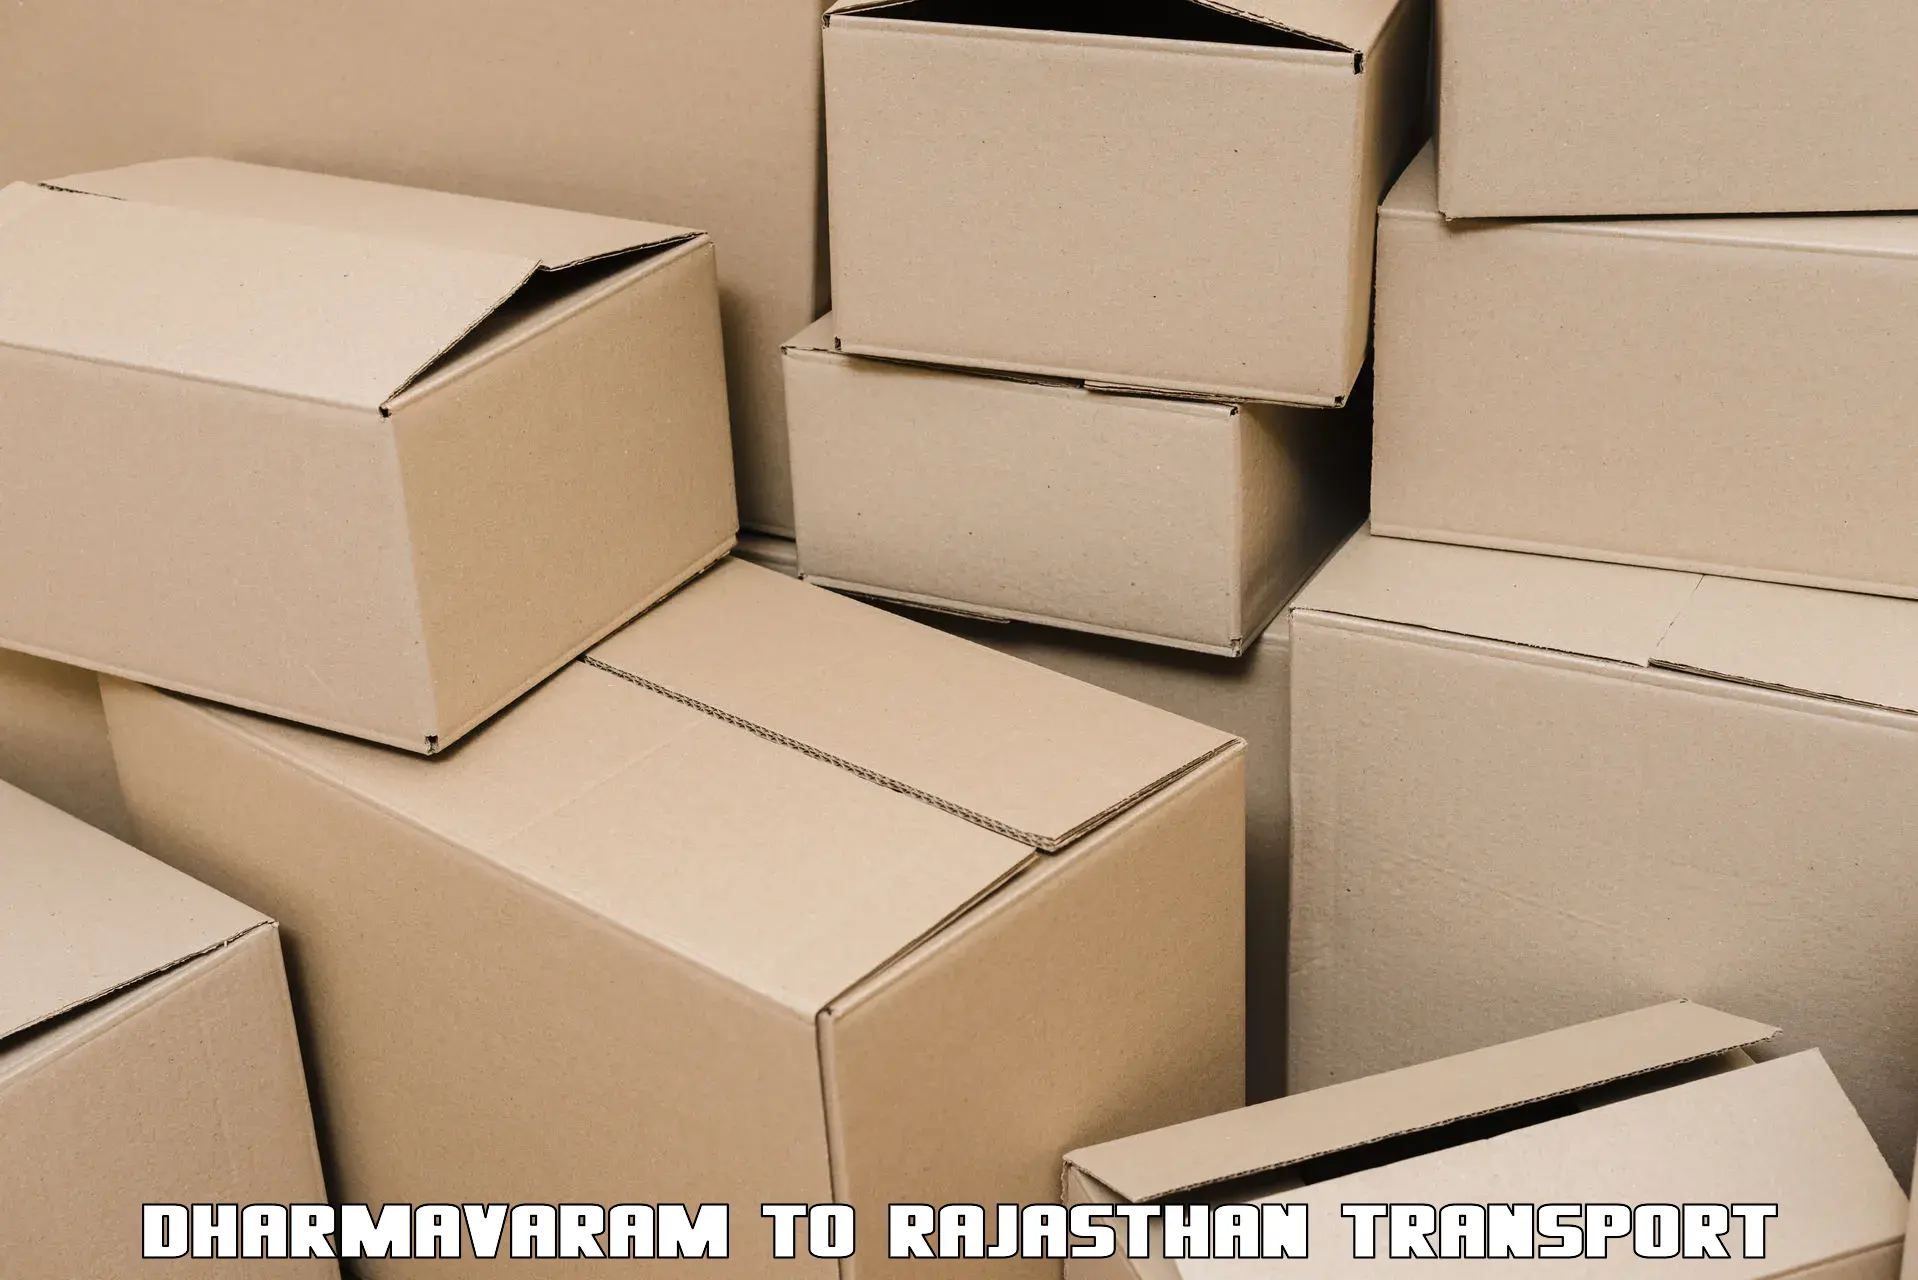 Container transport service Dharmavaram to Rajasthan